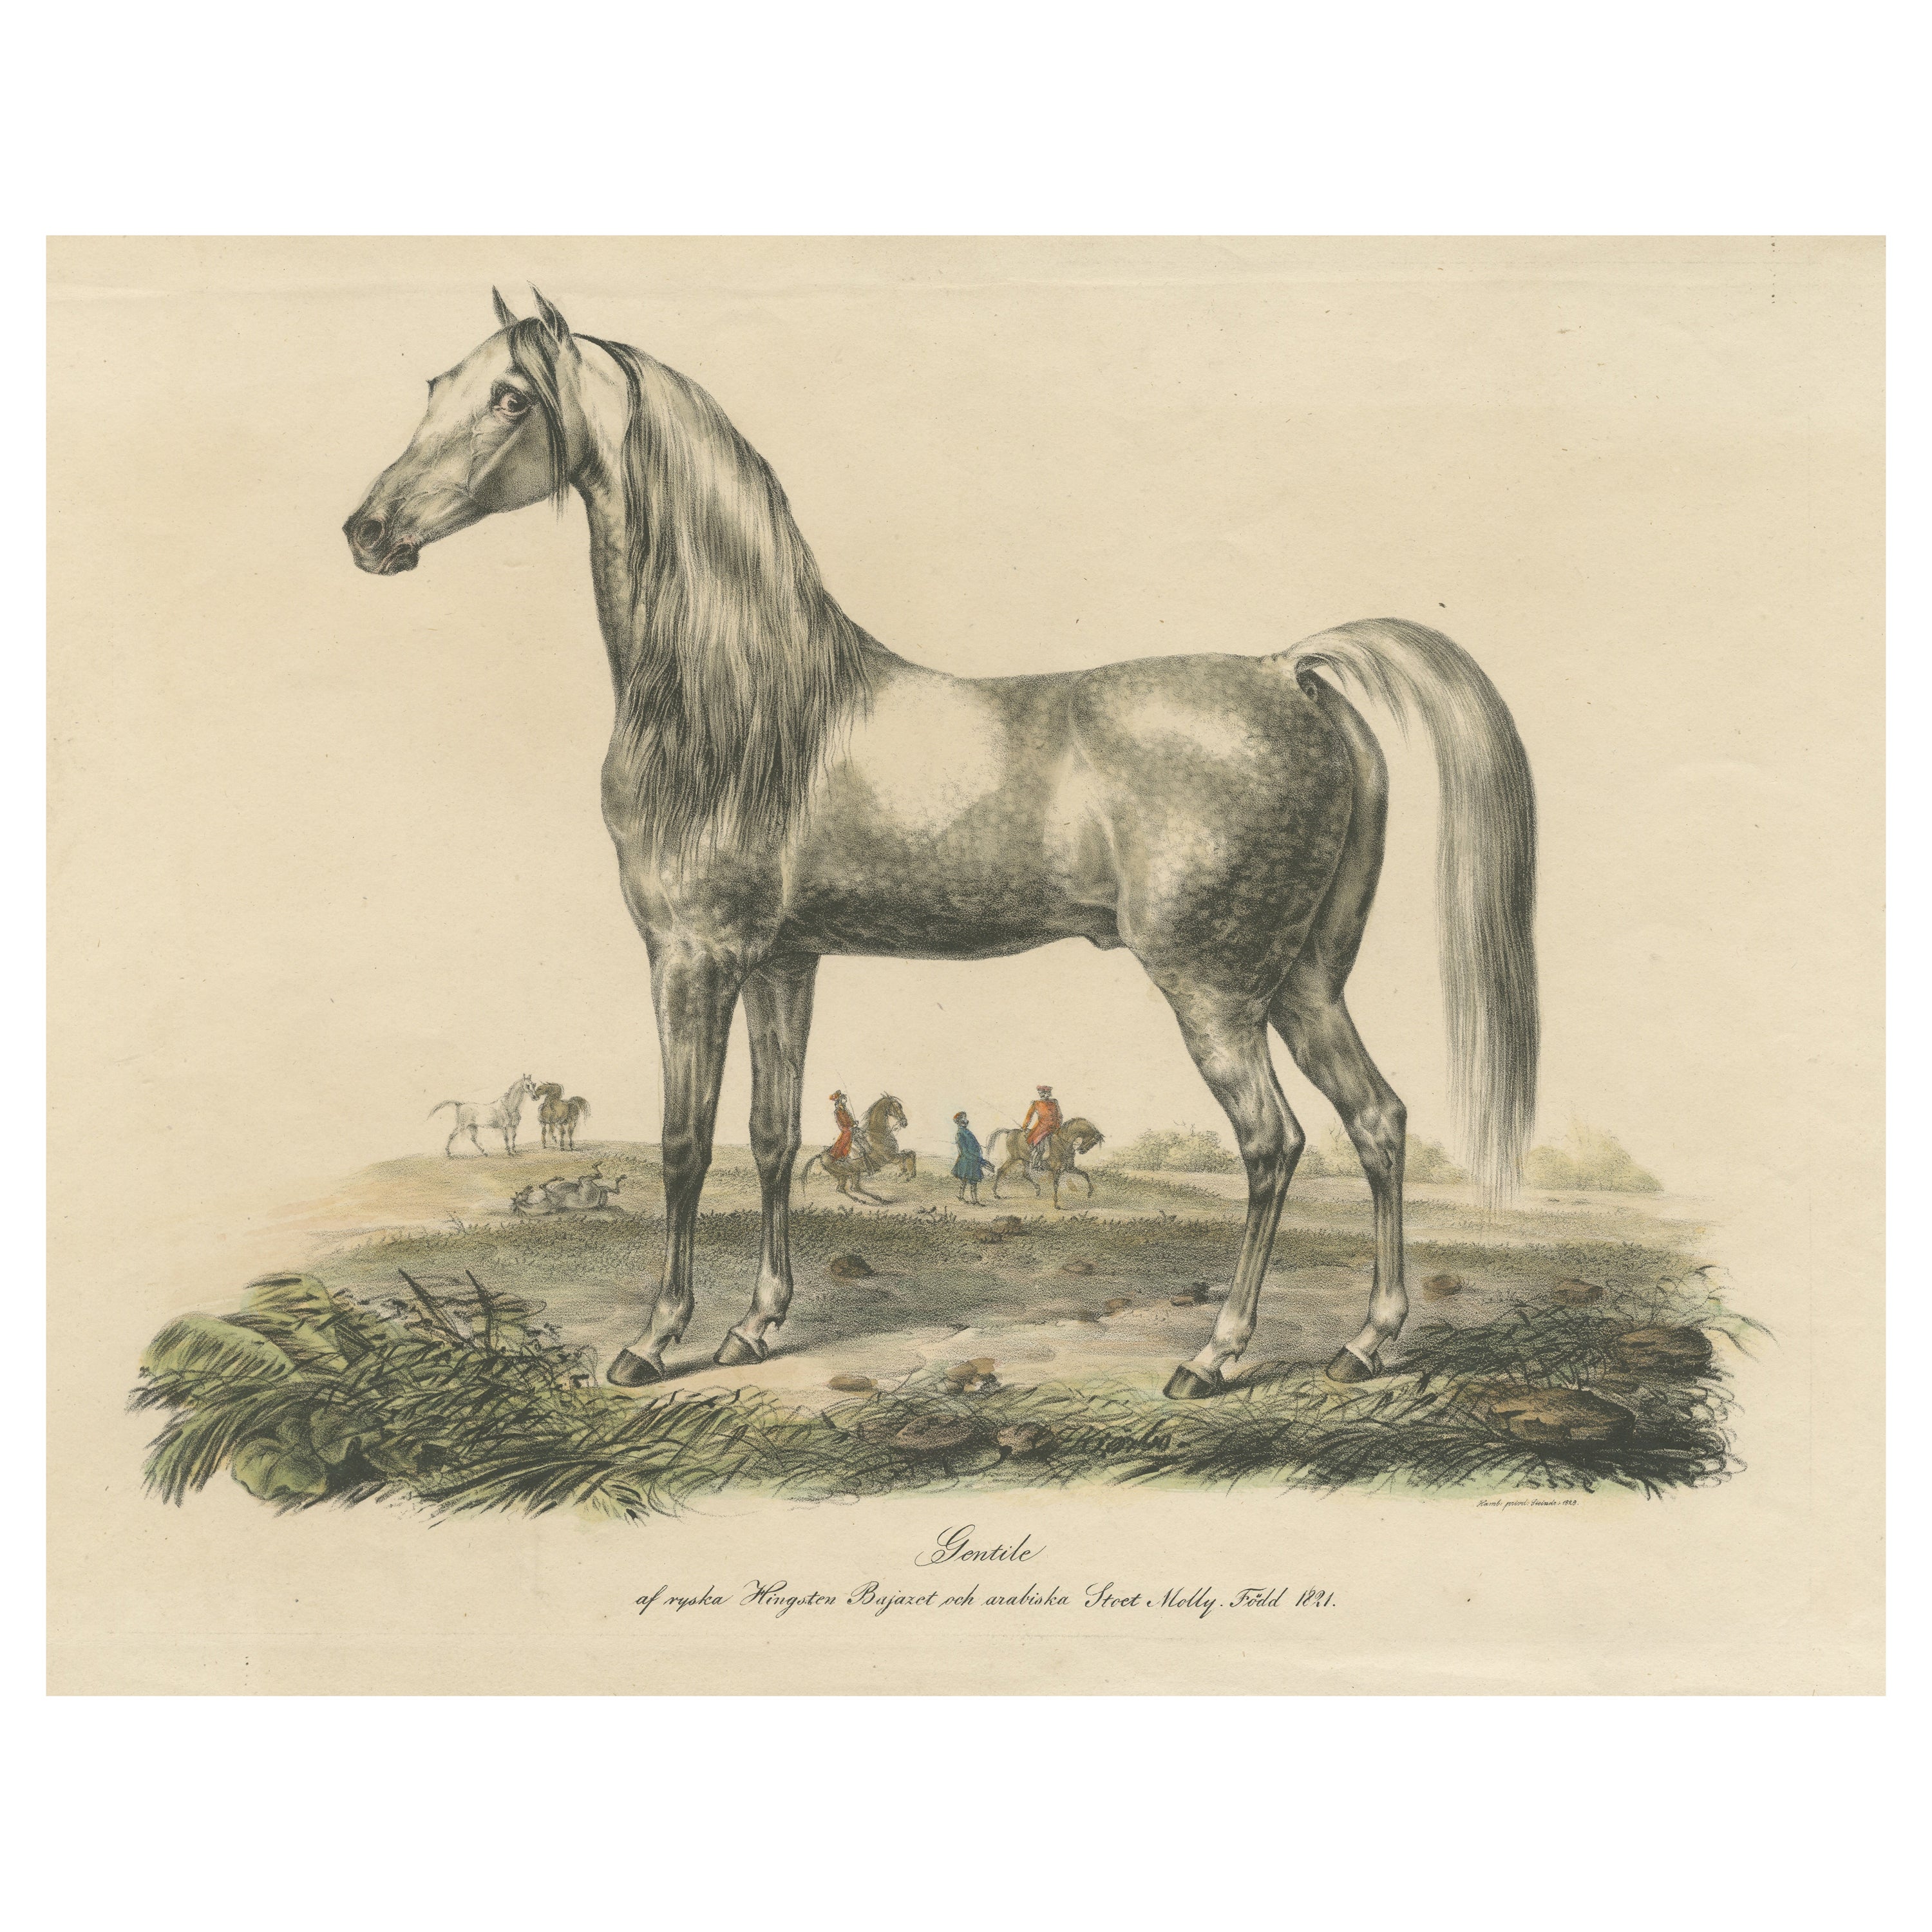 Antique Print of an Arabic Horse Named Gentile For Sale